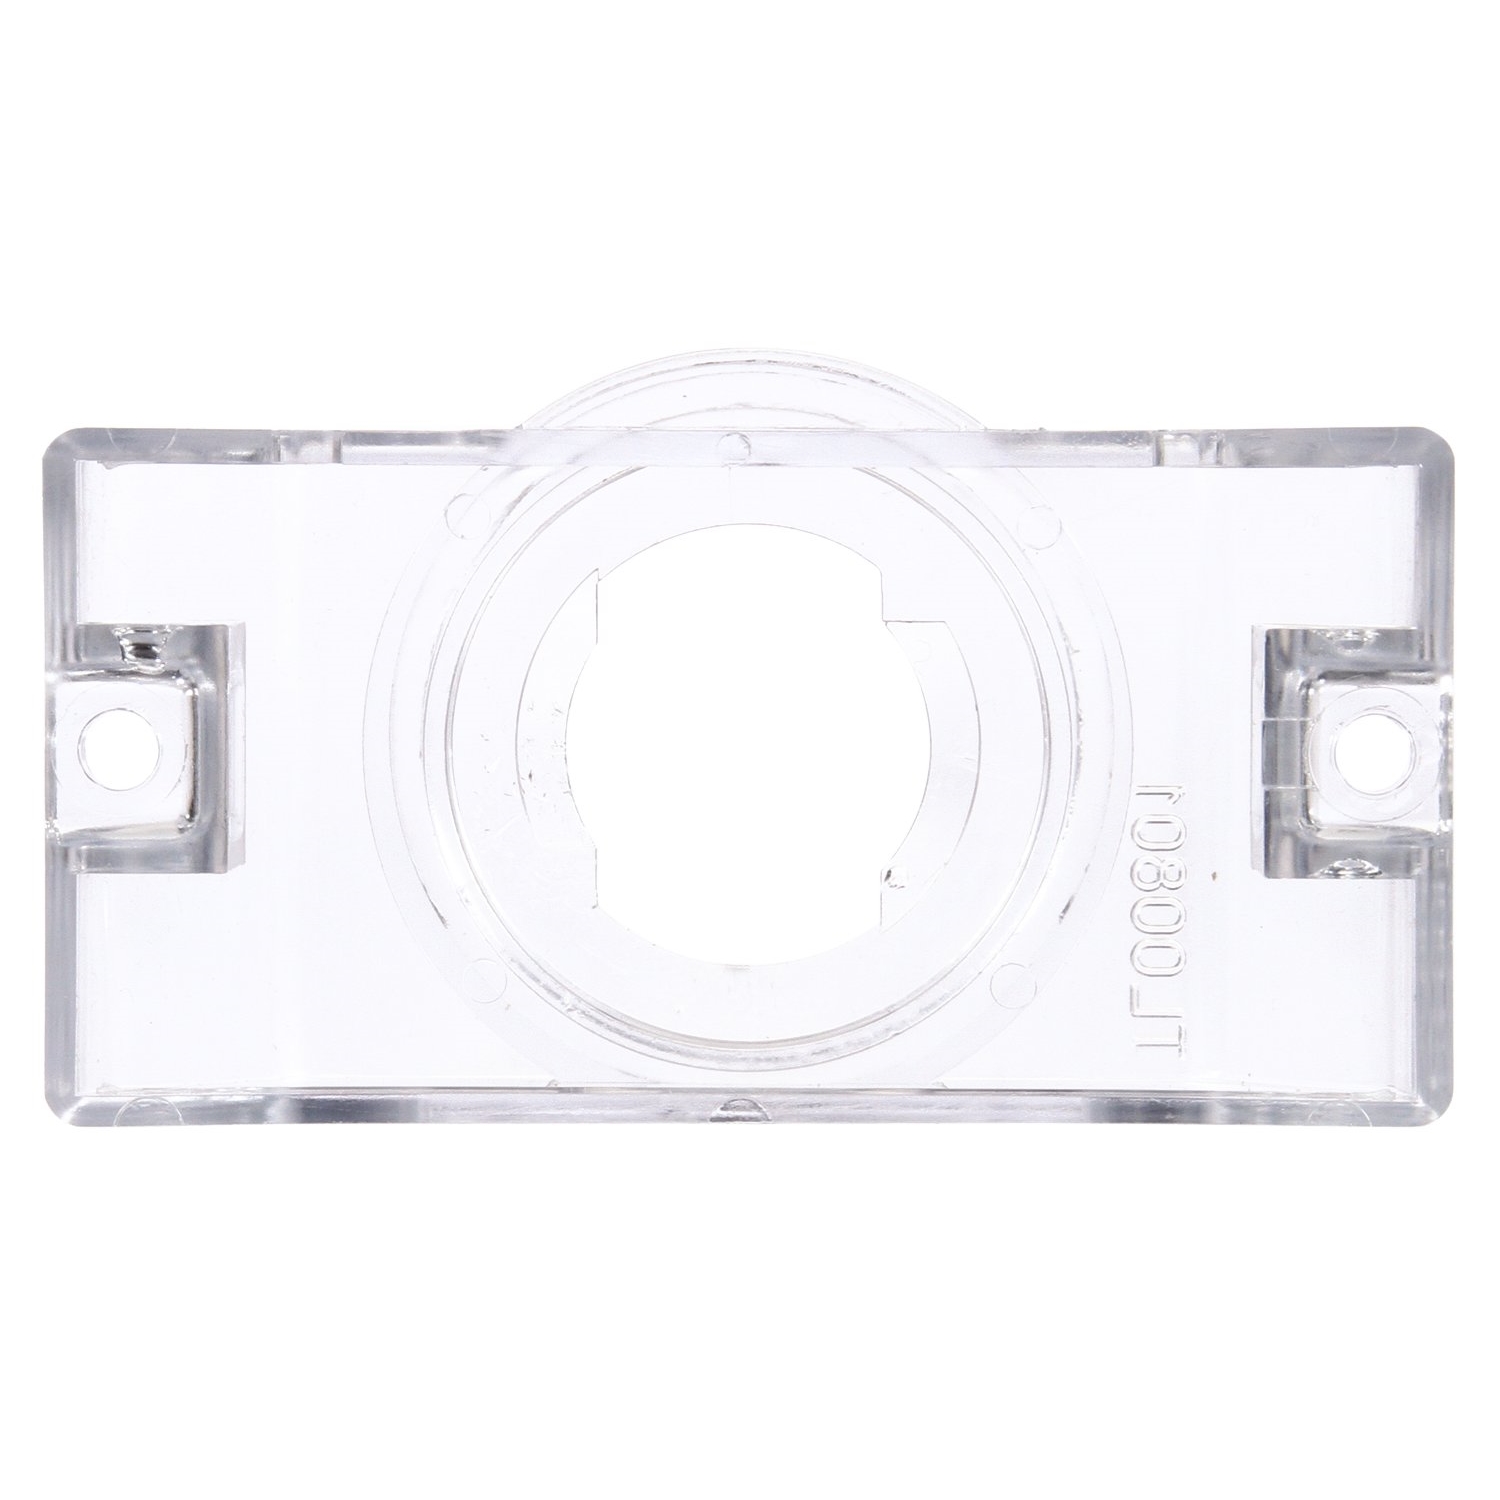 Truck-Lite 30403 Bracket Mount 30 Series, Round, 30 Series Lights, Clear Polycarbonate, 2 Screw, Pl-10, Stripped End/Ring Terminal, Kit 